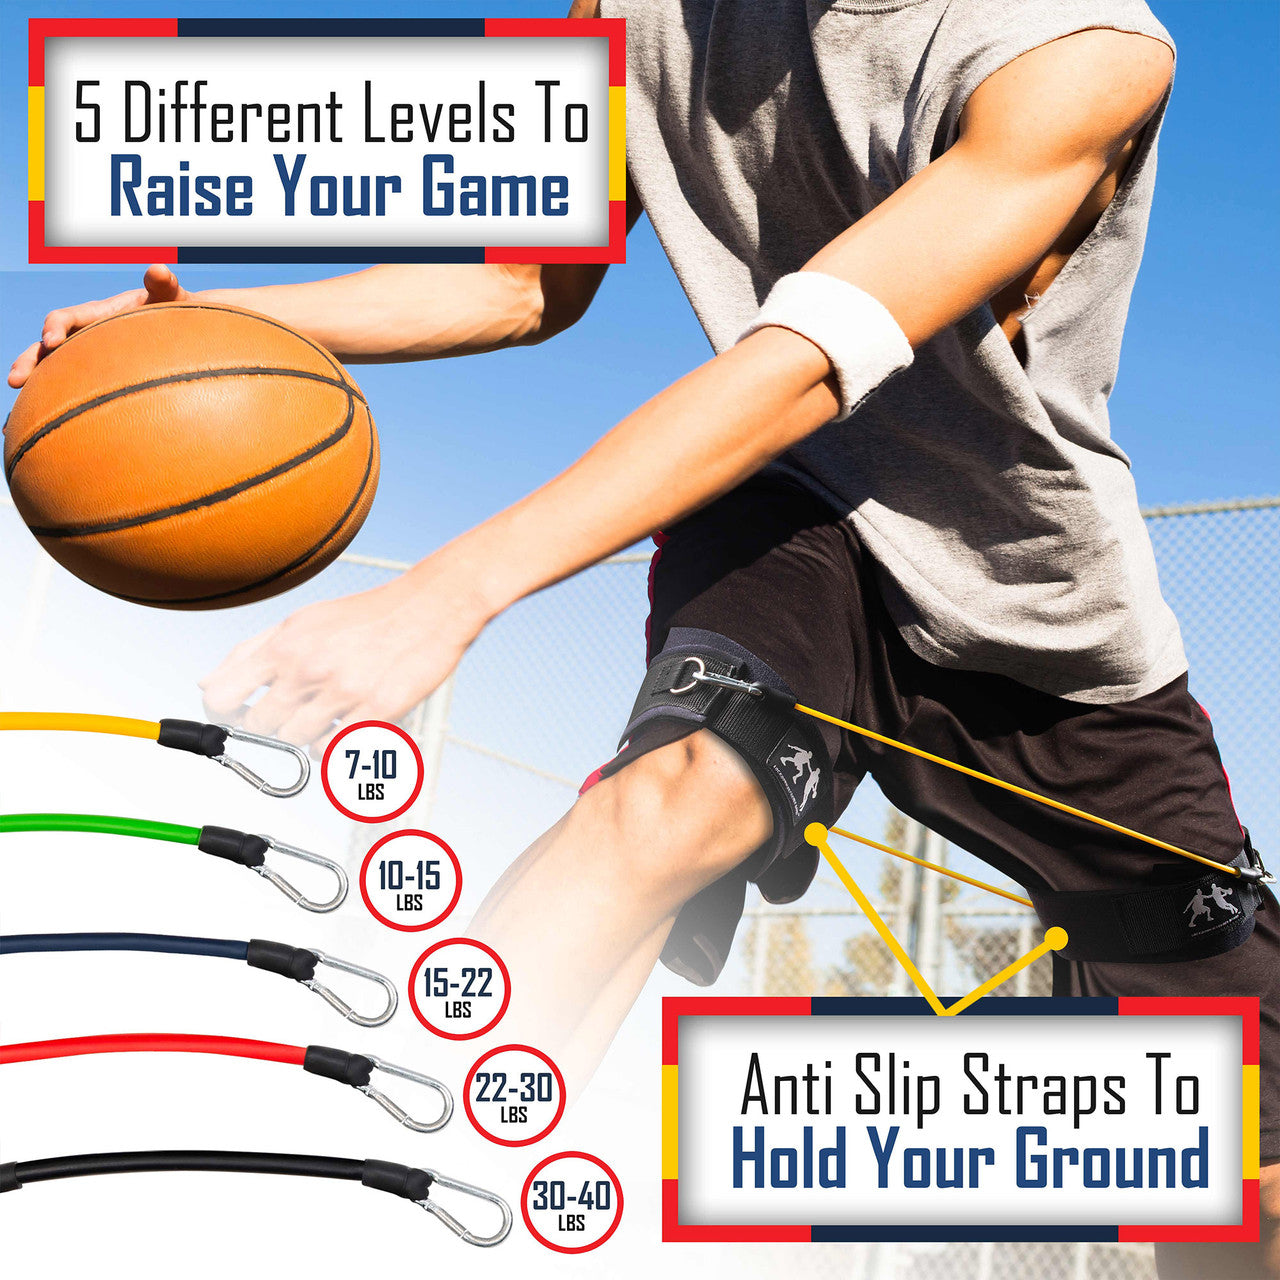 Resistance bands dribbling drills are easy to do with the LockDown bands.  Just wear them on your thighs and you can still dribble the ball anyway you like and get up and down the basketball court.